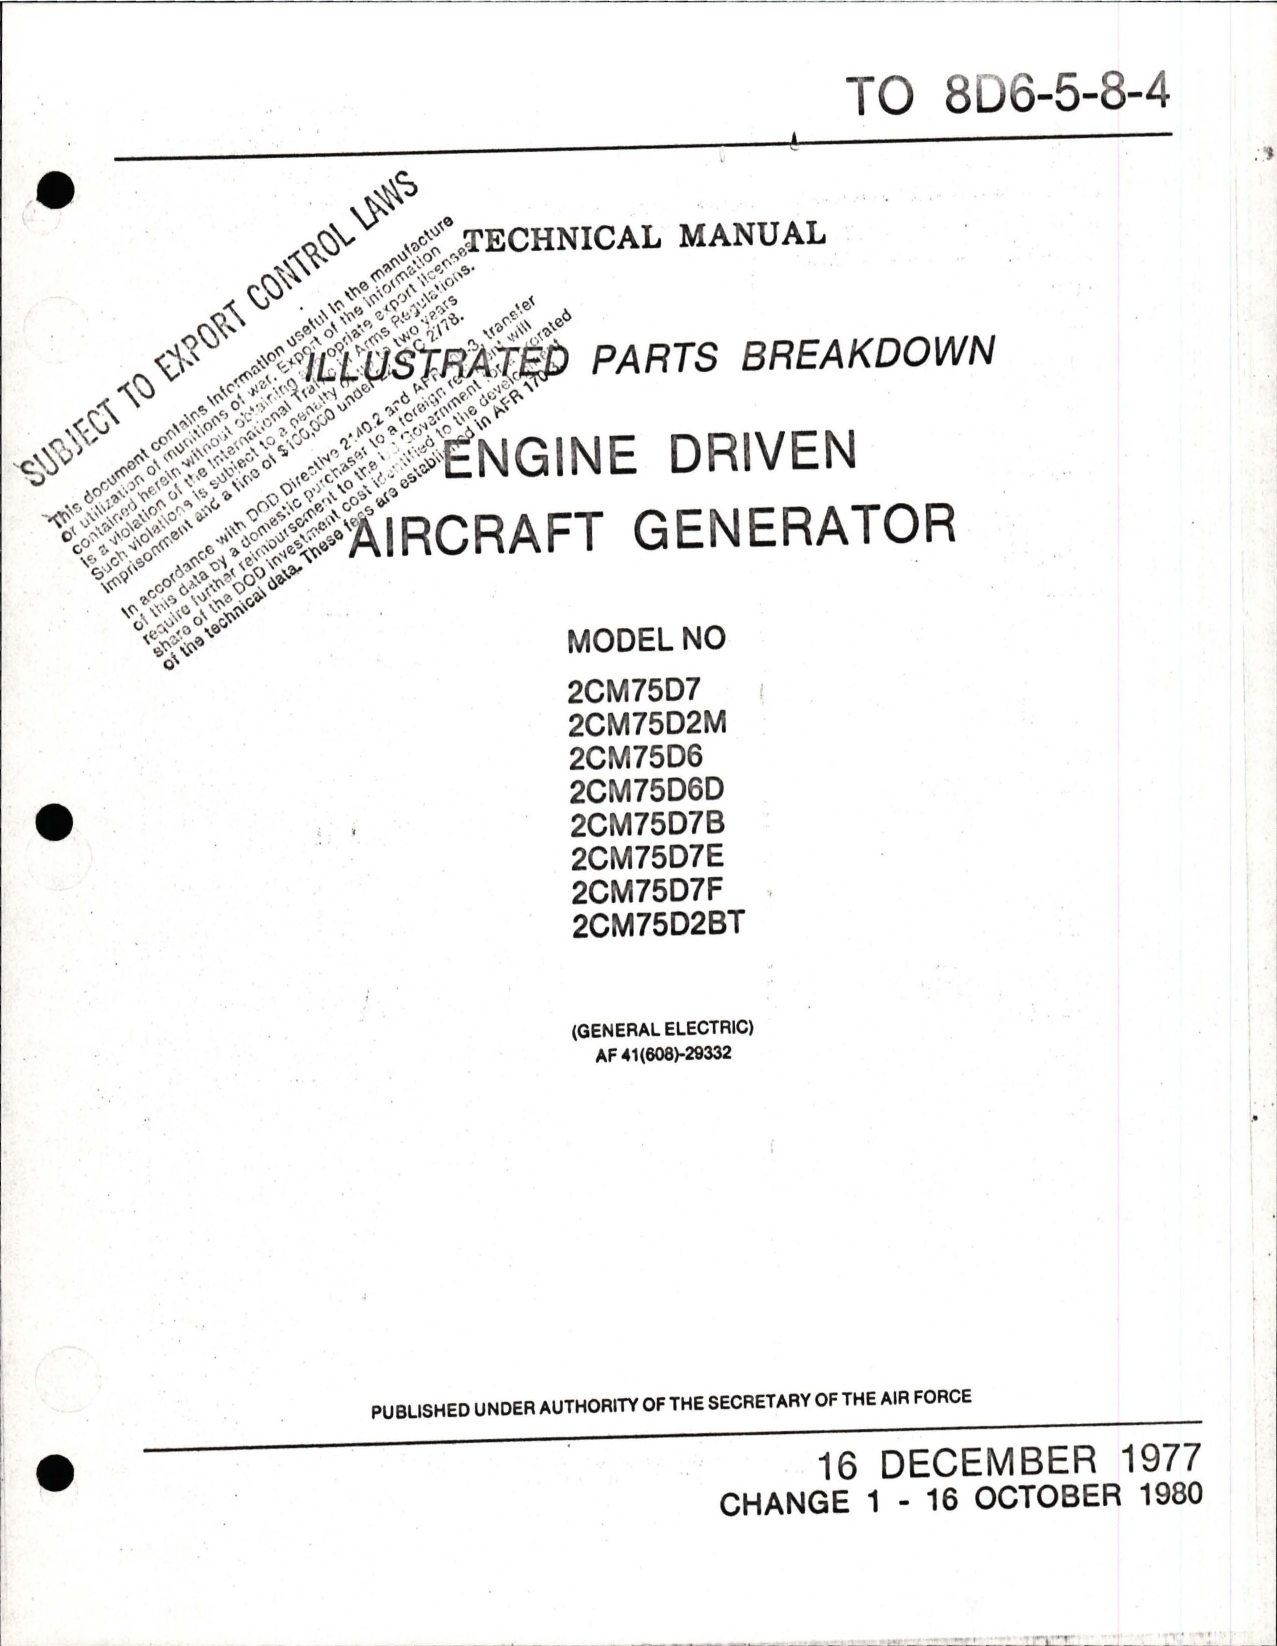 Sample page 1 from AirCorps Library document: Illustrated Parts Breakdown for Aircraft Generator